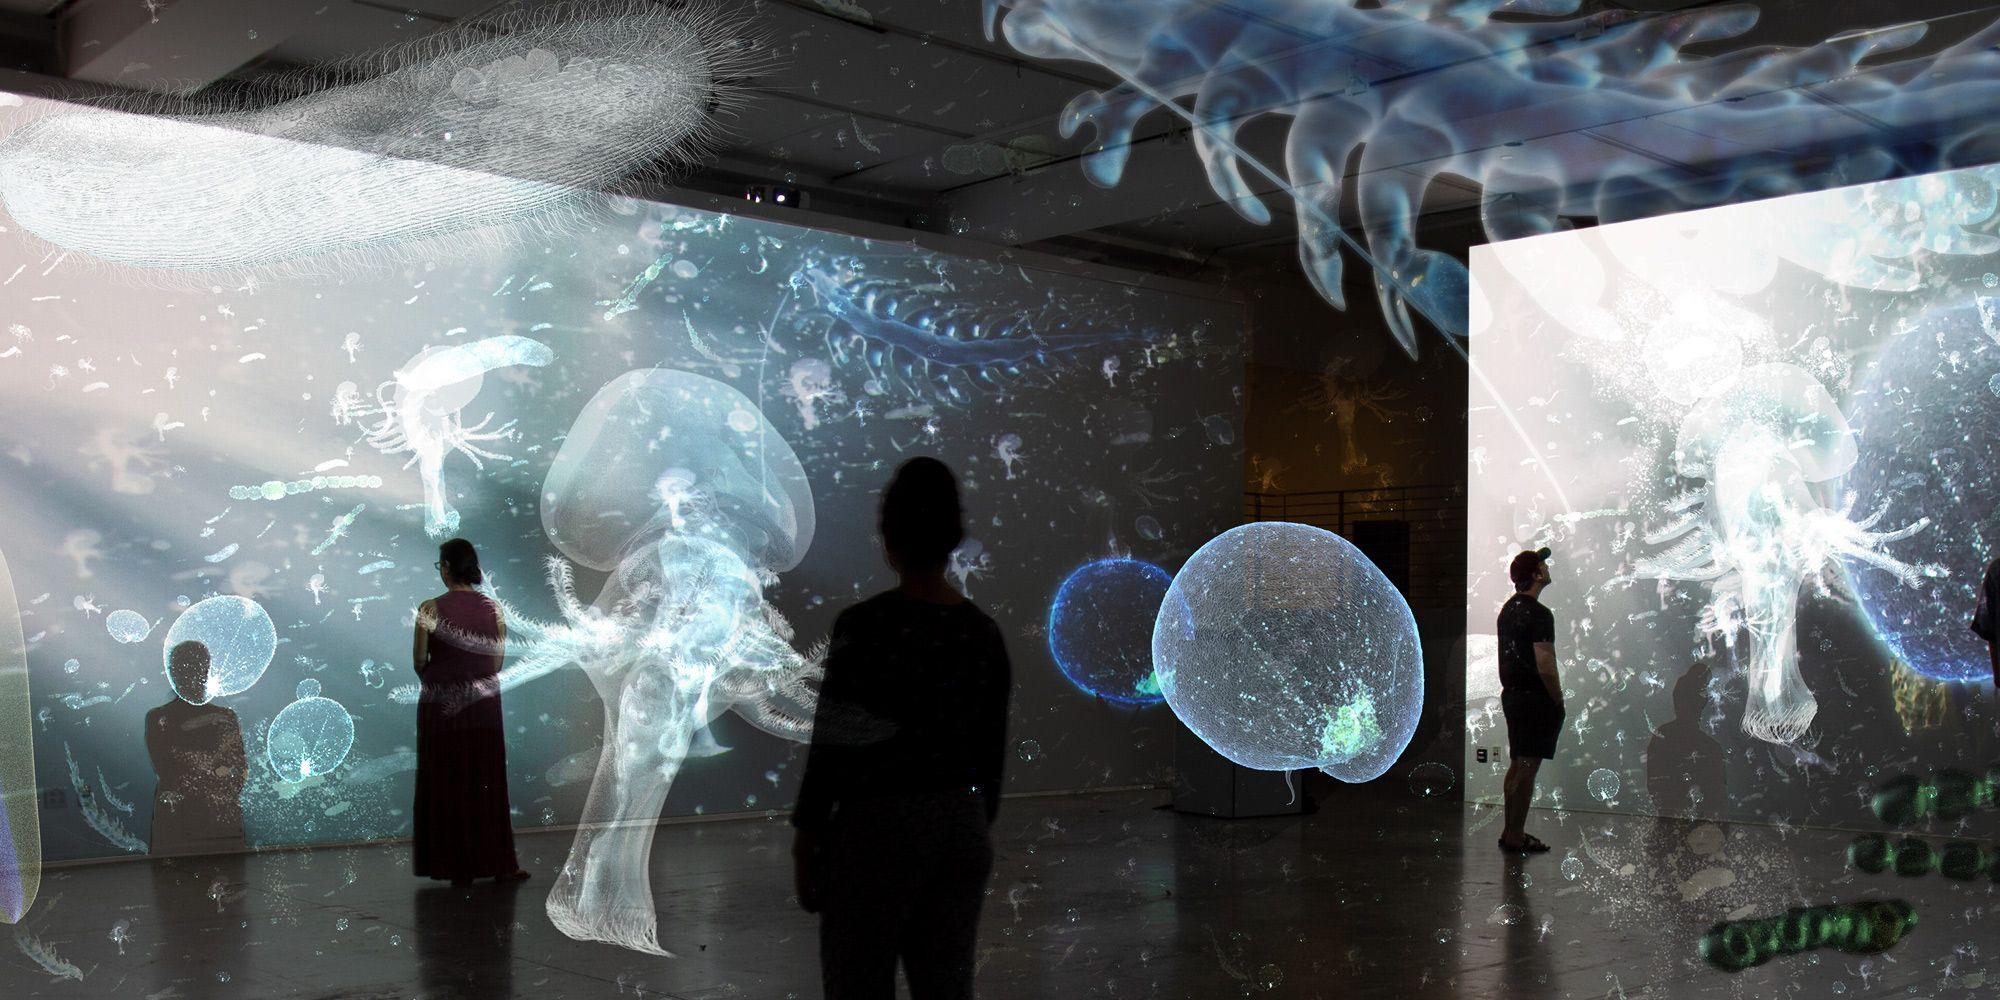 People in a room with many projections of sea life.